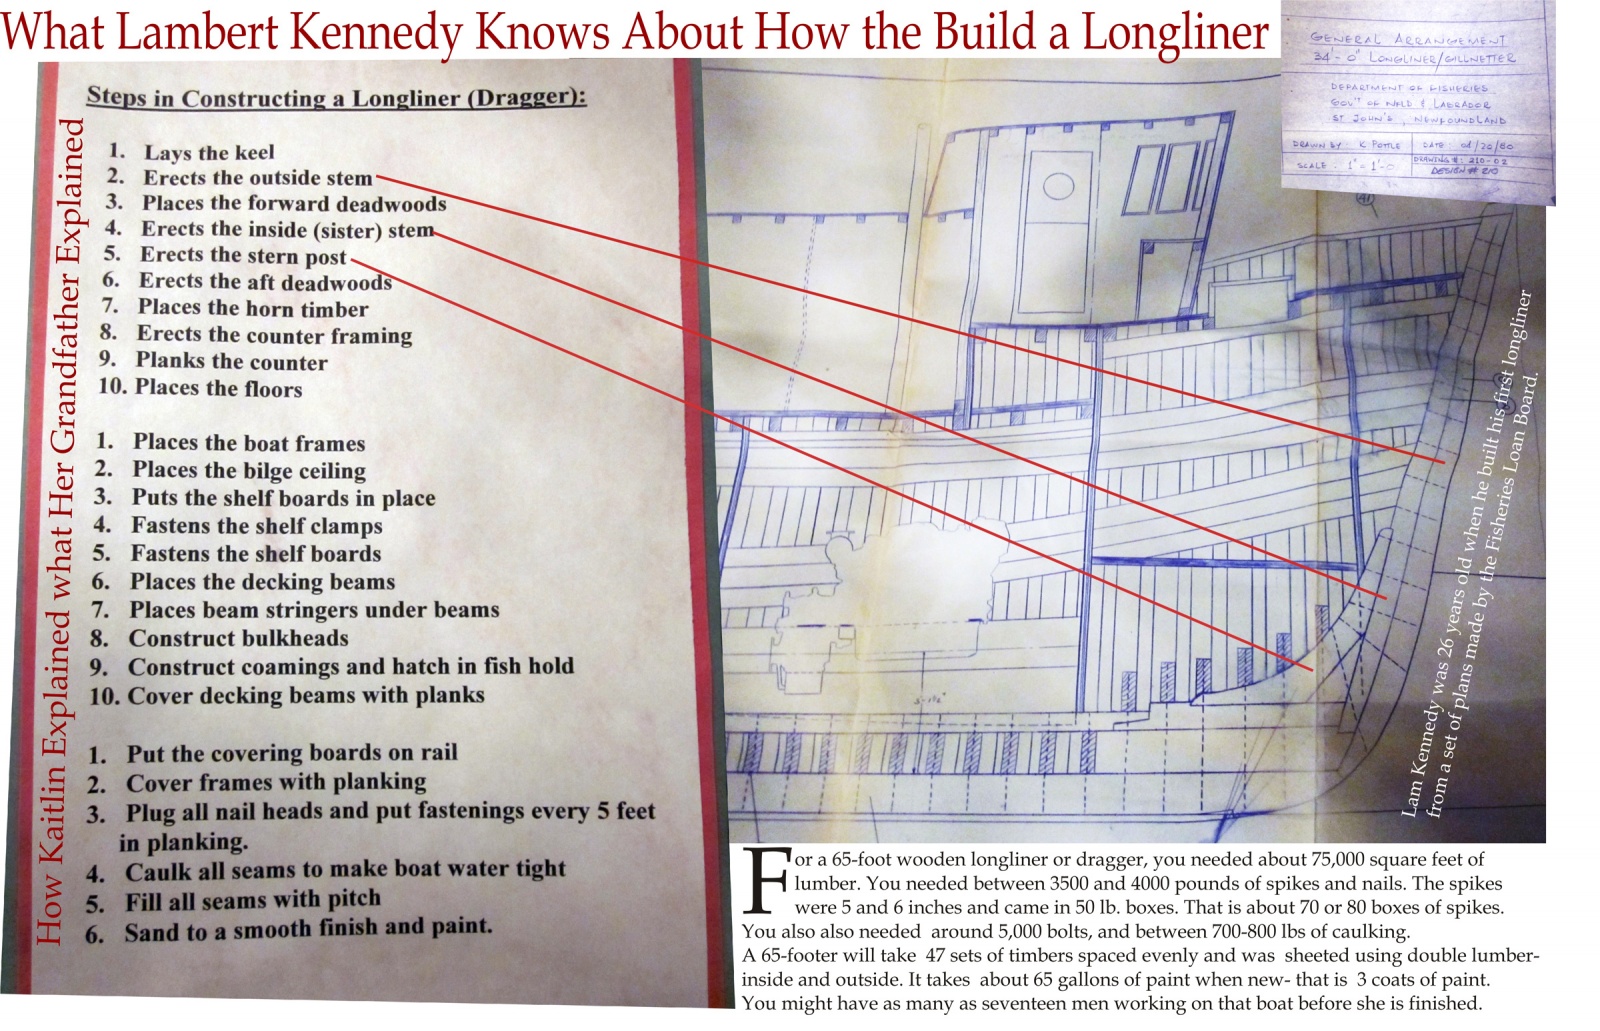 What Lambert Kennedy Knows About How to Build a Longliner